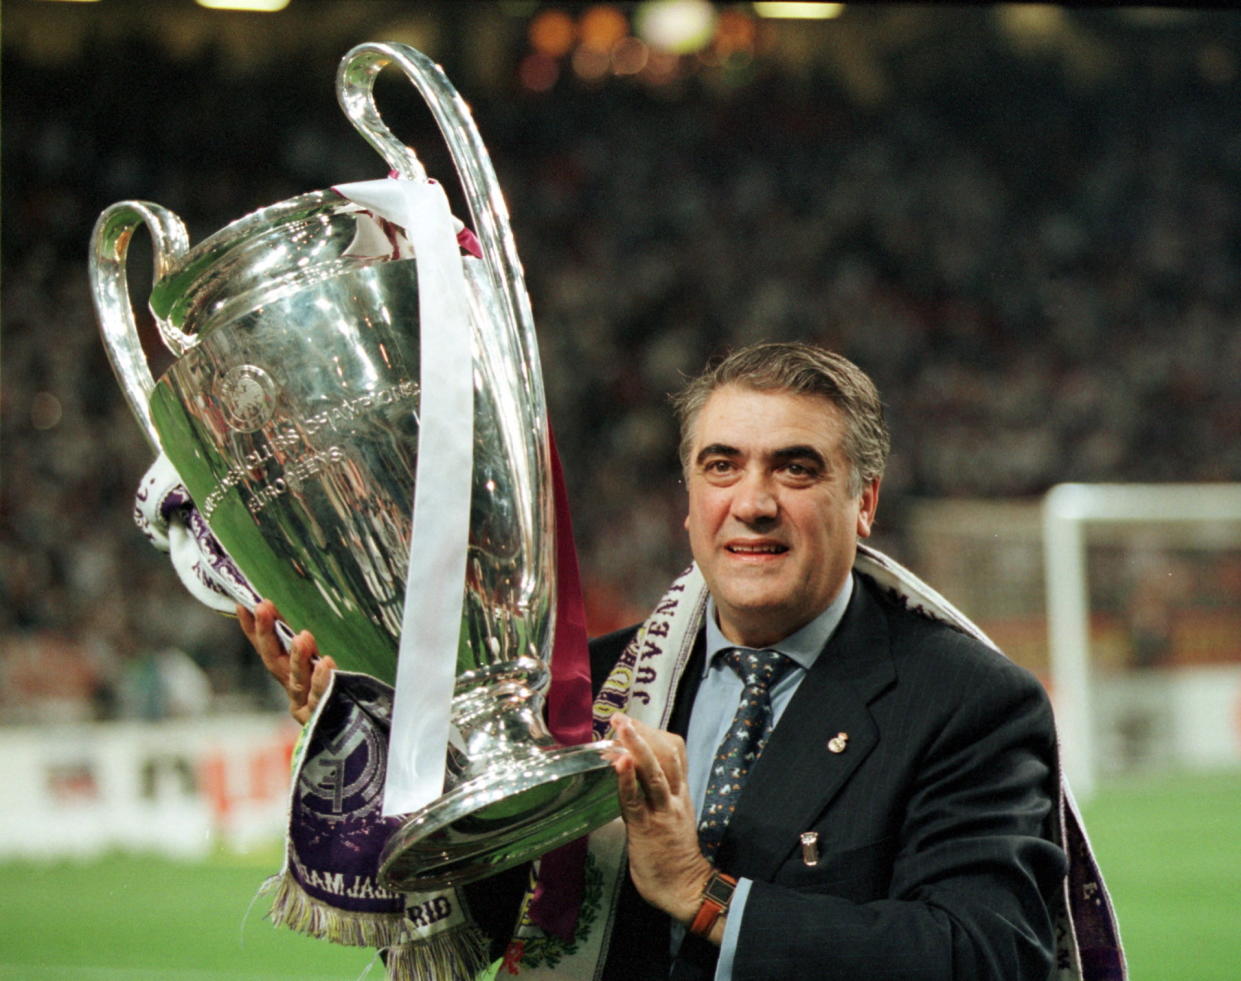 Lorenzo Sanz served as Real Madrid’s president from 1995-2000, leading the club to a pair of Champions League titles.